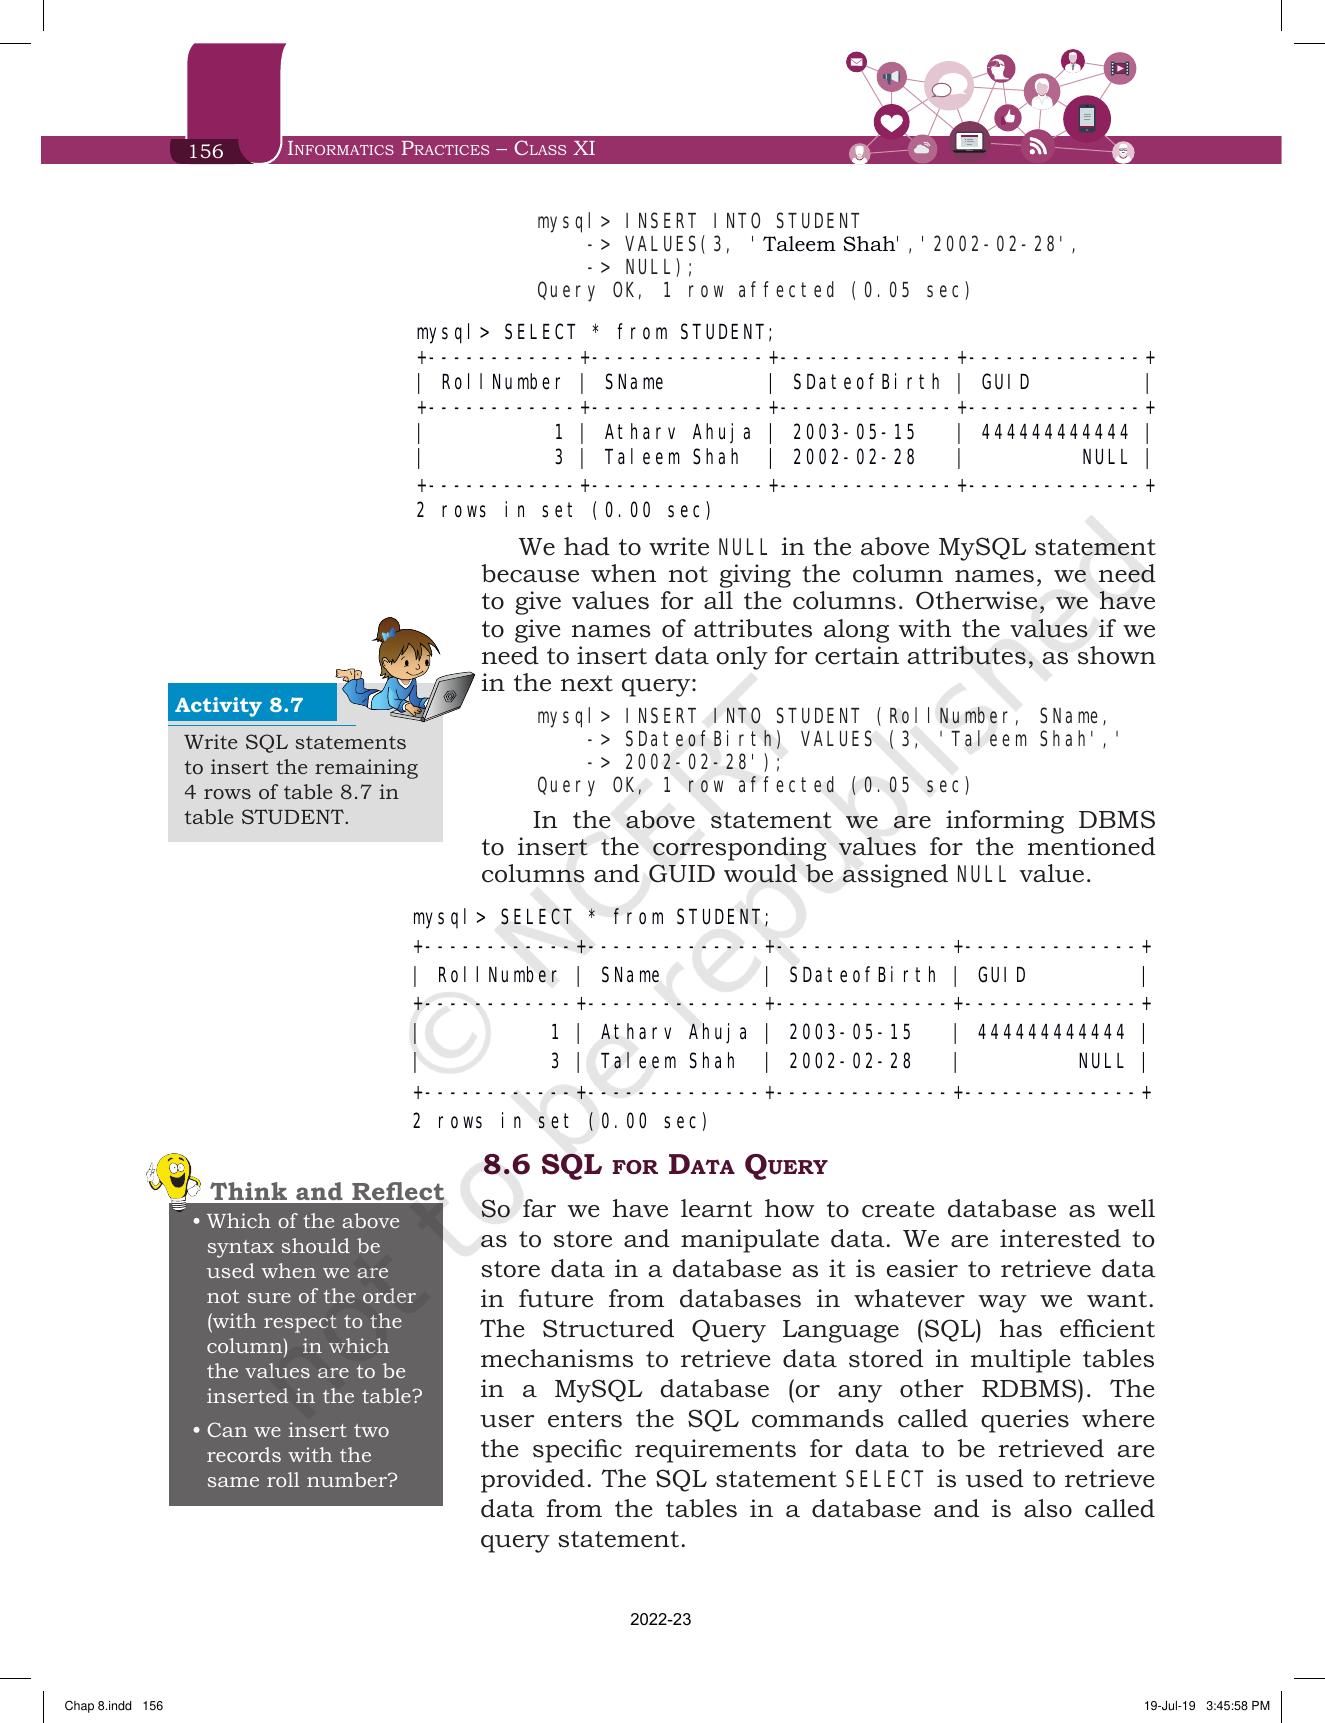 NCERT Book for Class 11 Informatics Practices Chapter 8 Introduction to Structured Query Language (SQL) - Page 14